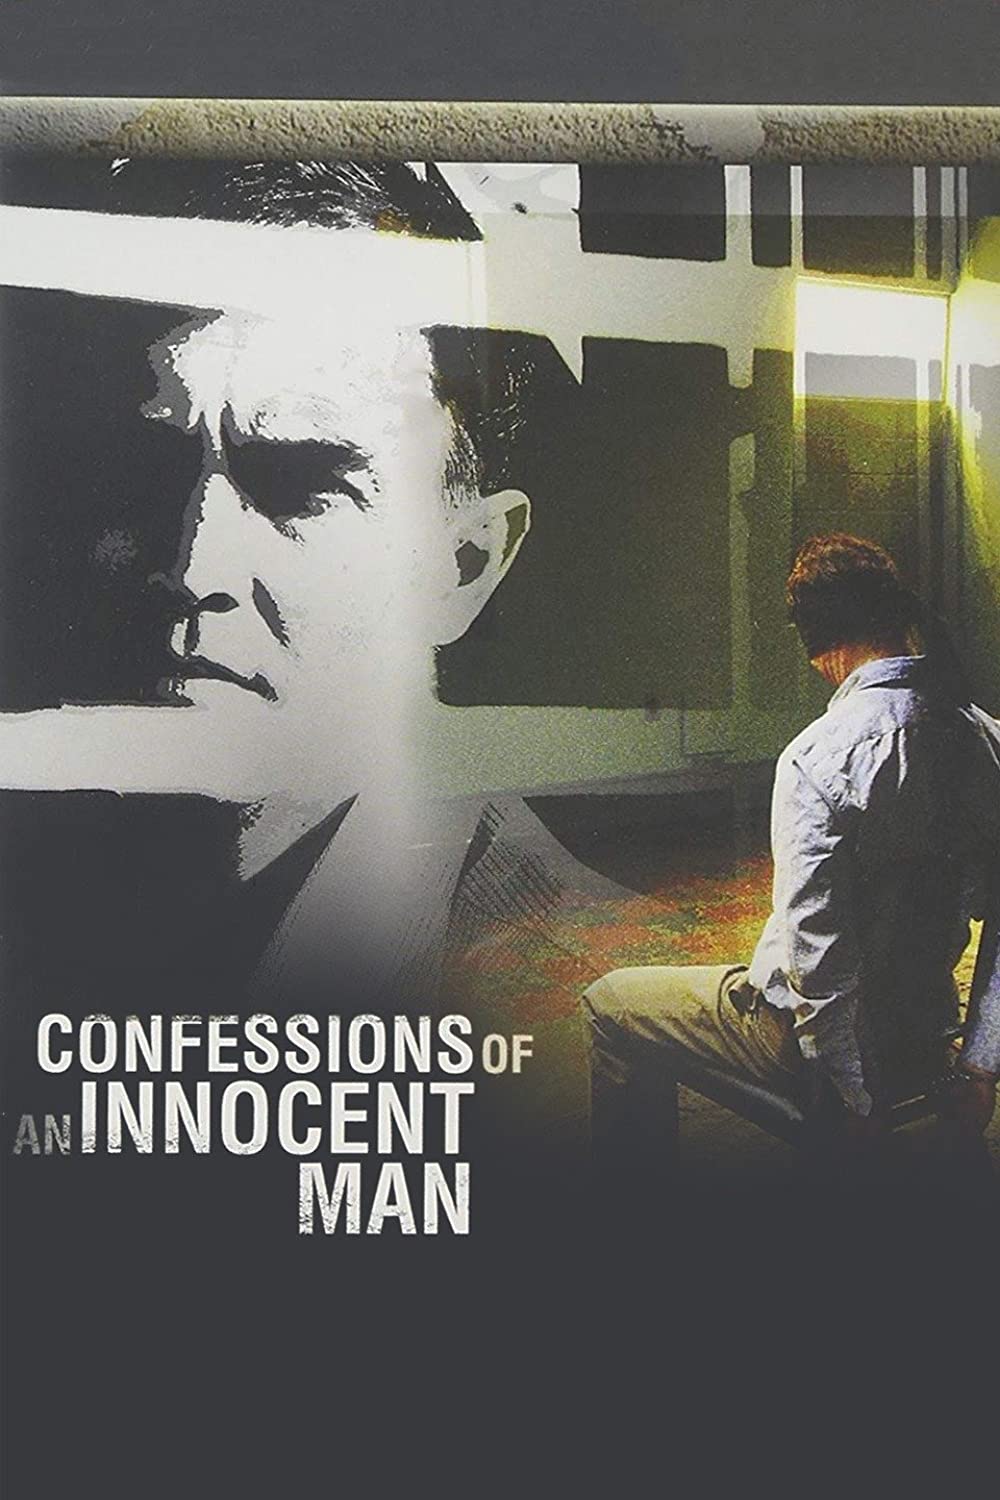 Download Confessions of an Innocent Man Movie | Confessions Of An Innocent Man Dvd